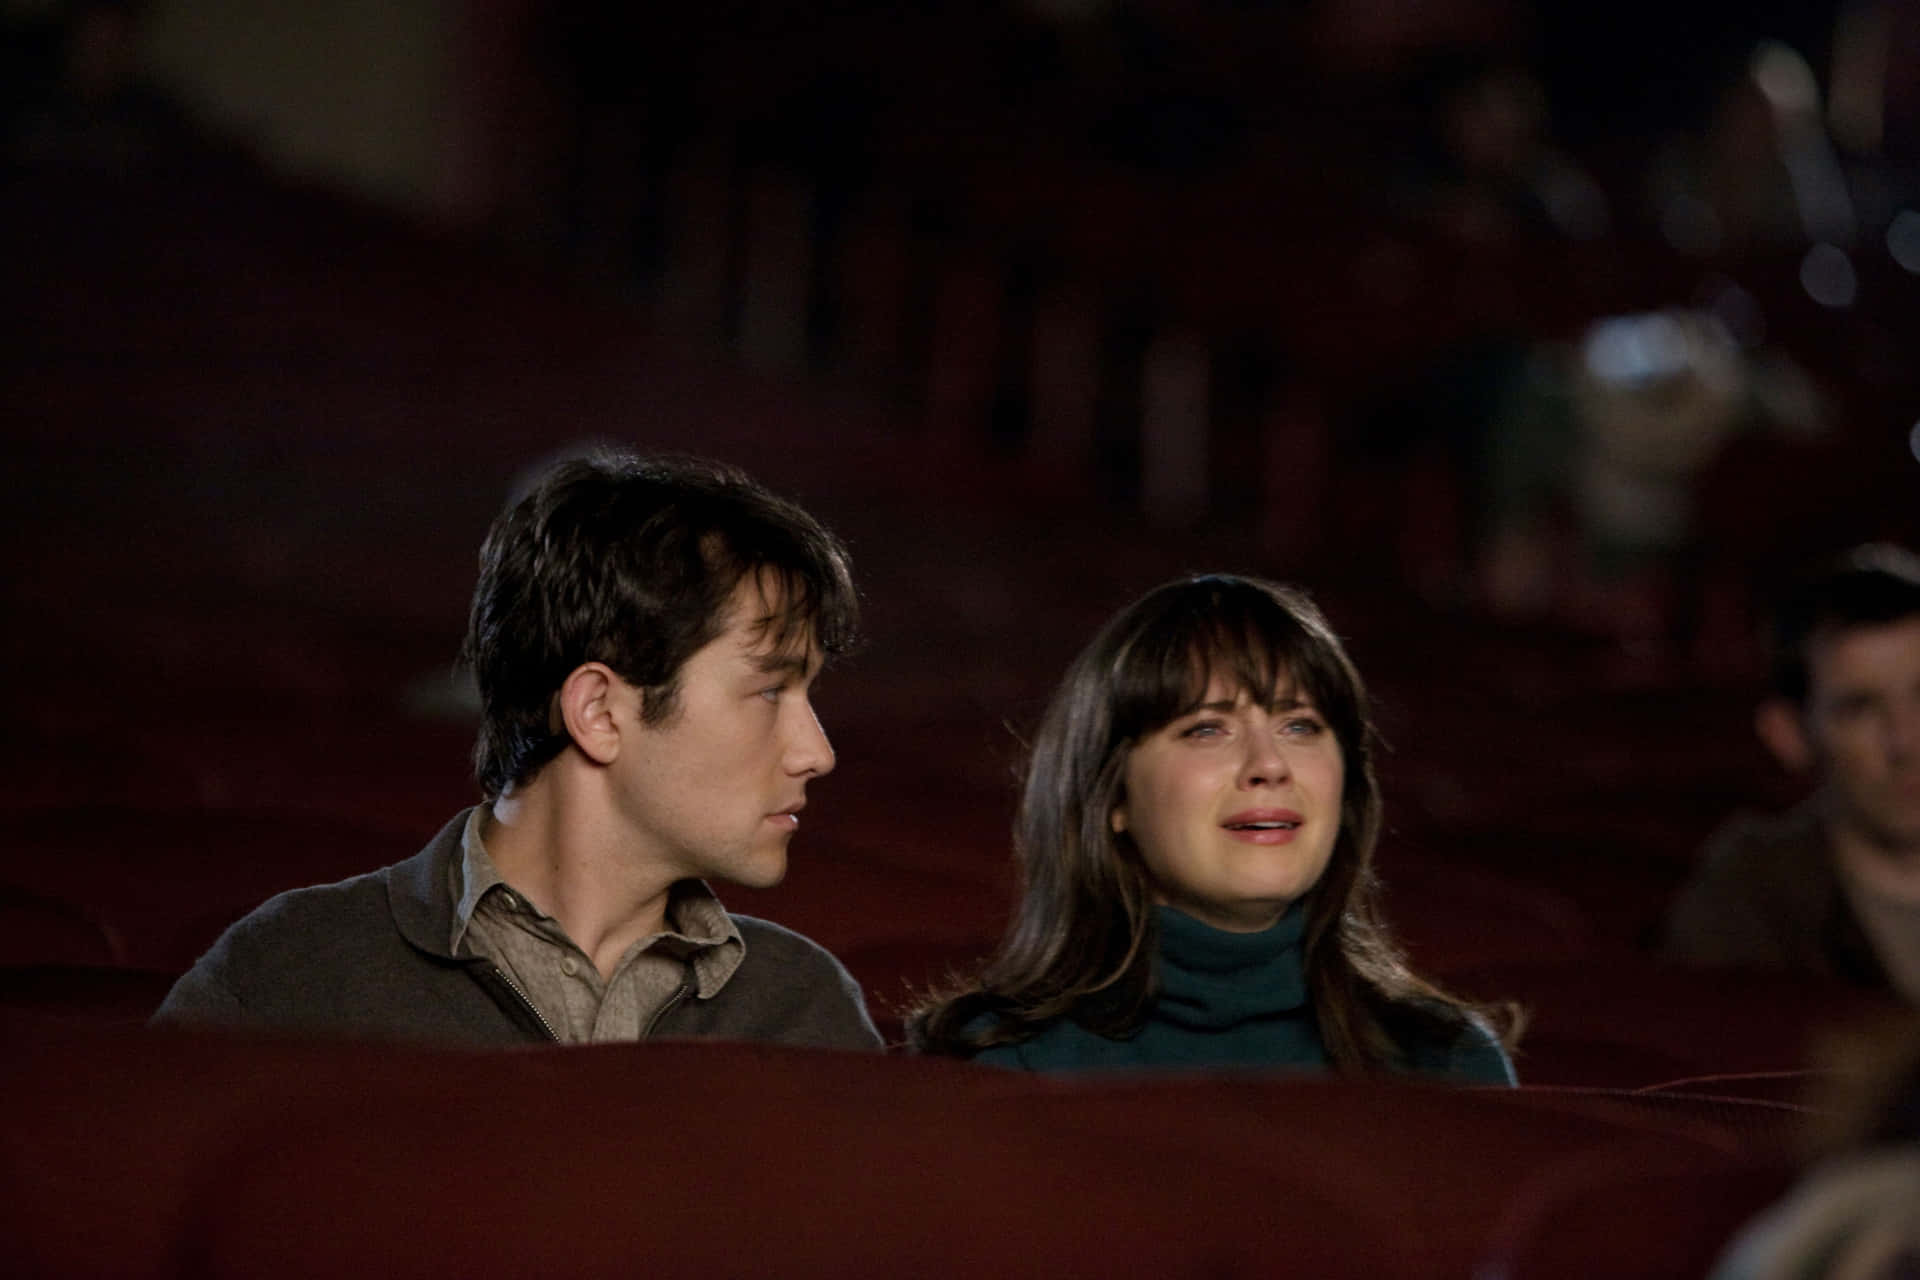 A Man And Woman Sitting In A Theater Watching A Movie